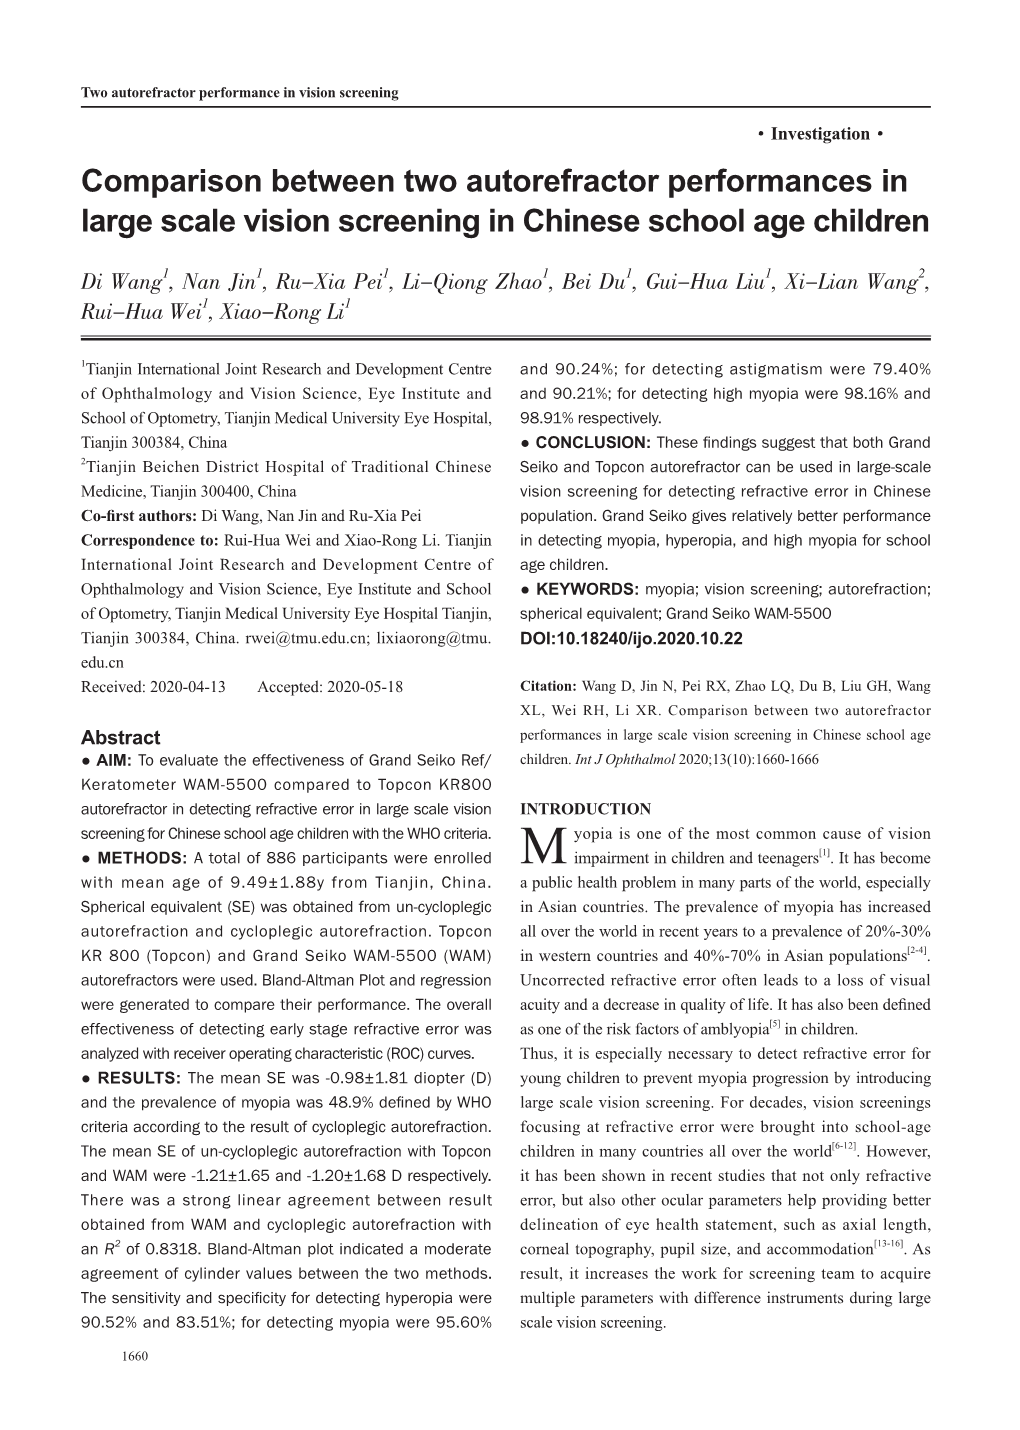 Comparison Between Two Autorefractor Performances in Large Scale Vision Screening in Chinese School Age Children